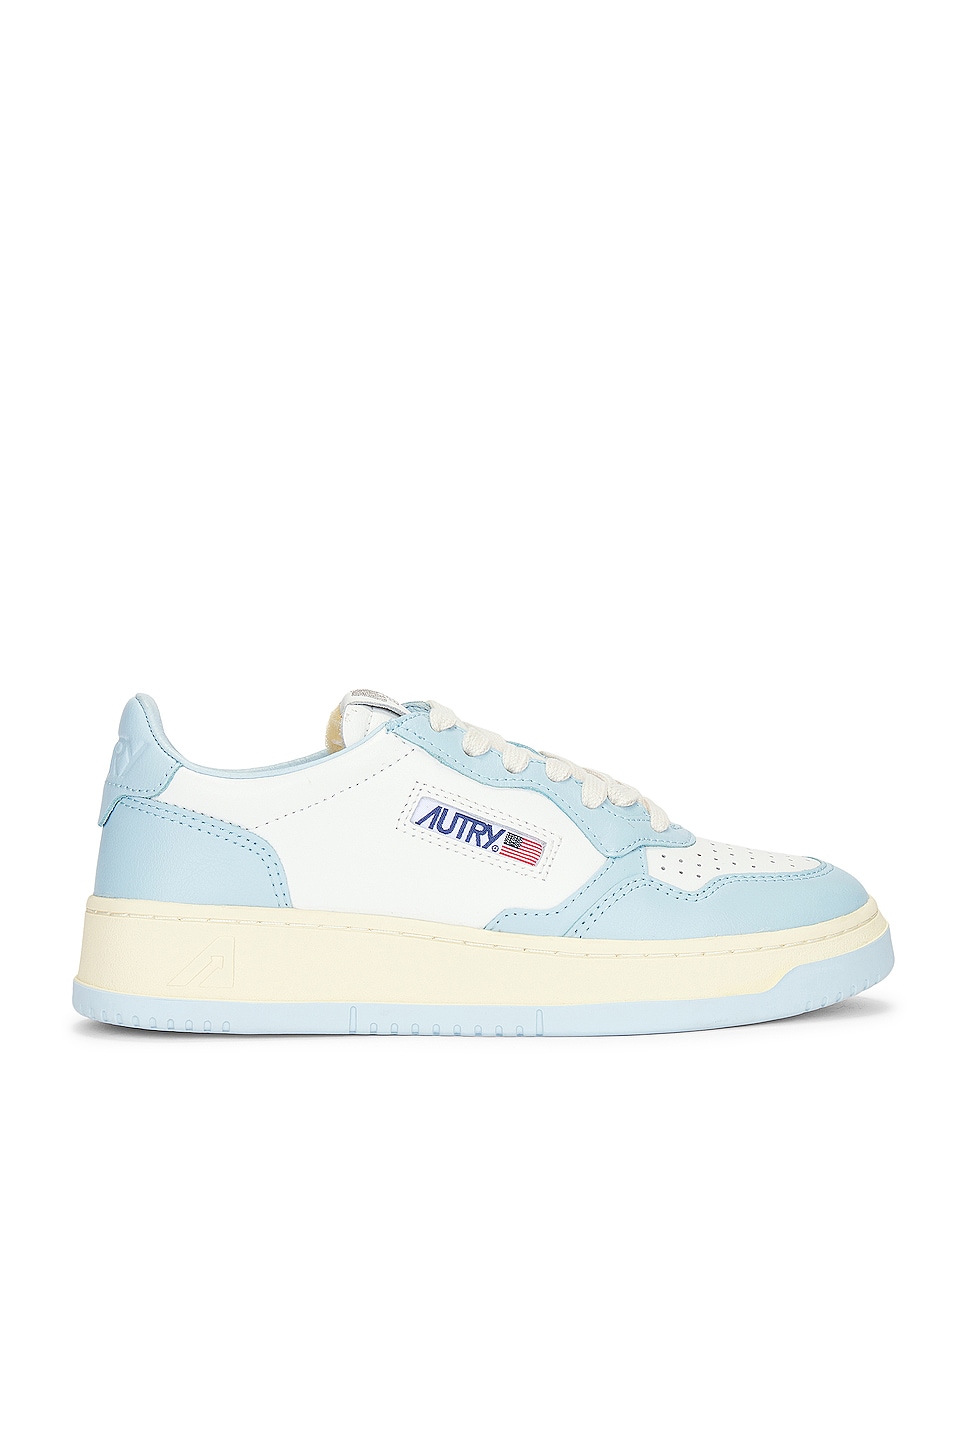 Image 1 of Autry Bicolor Medalist Sneaker in White & Blue